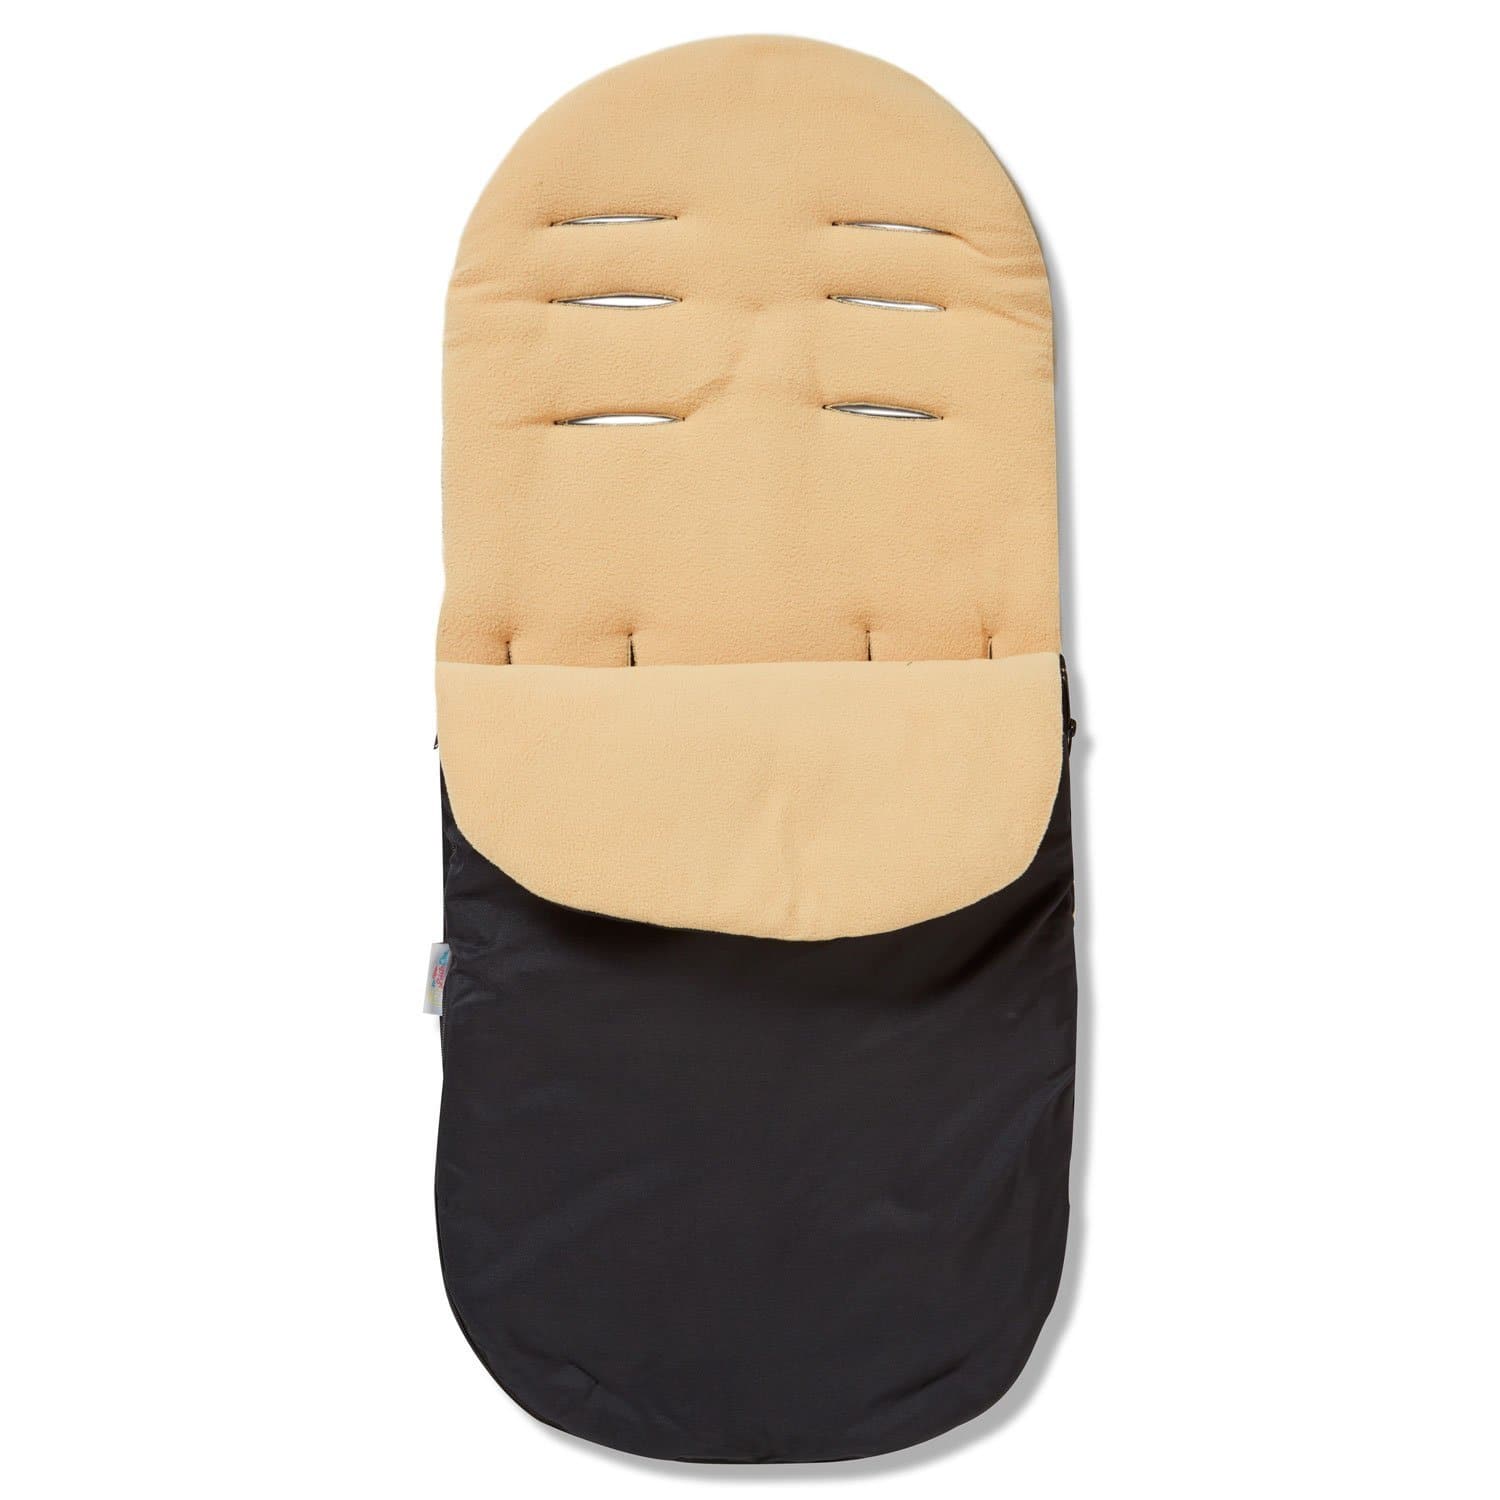 Footmuff / Cosy Toes Compatible with Maxi Cosi - Sand / Fits All Models | For Your Little One